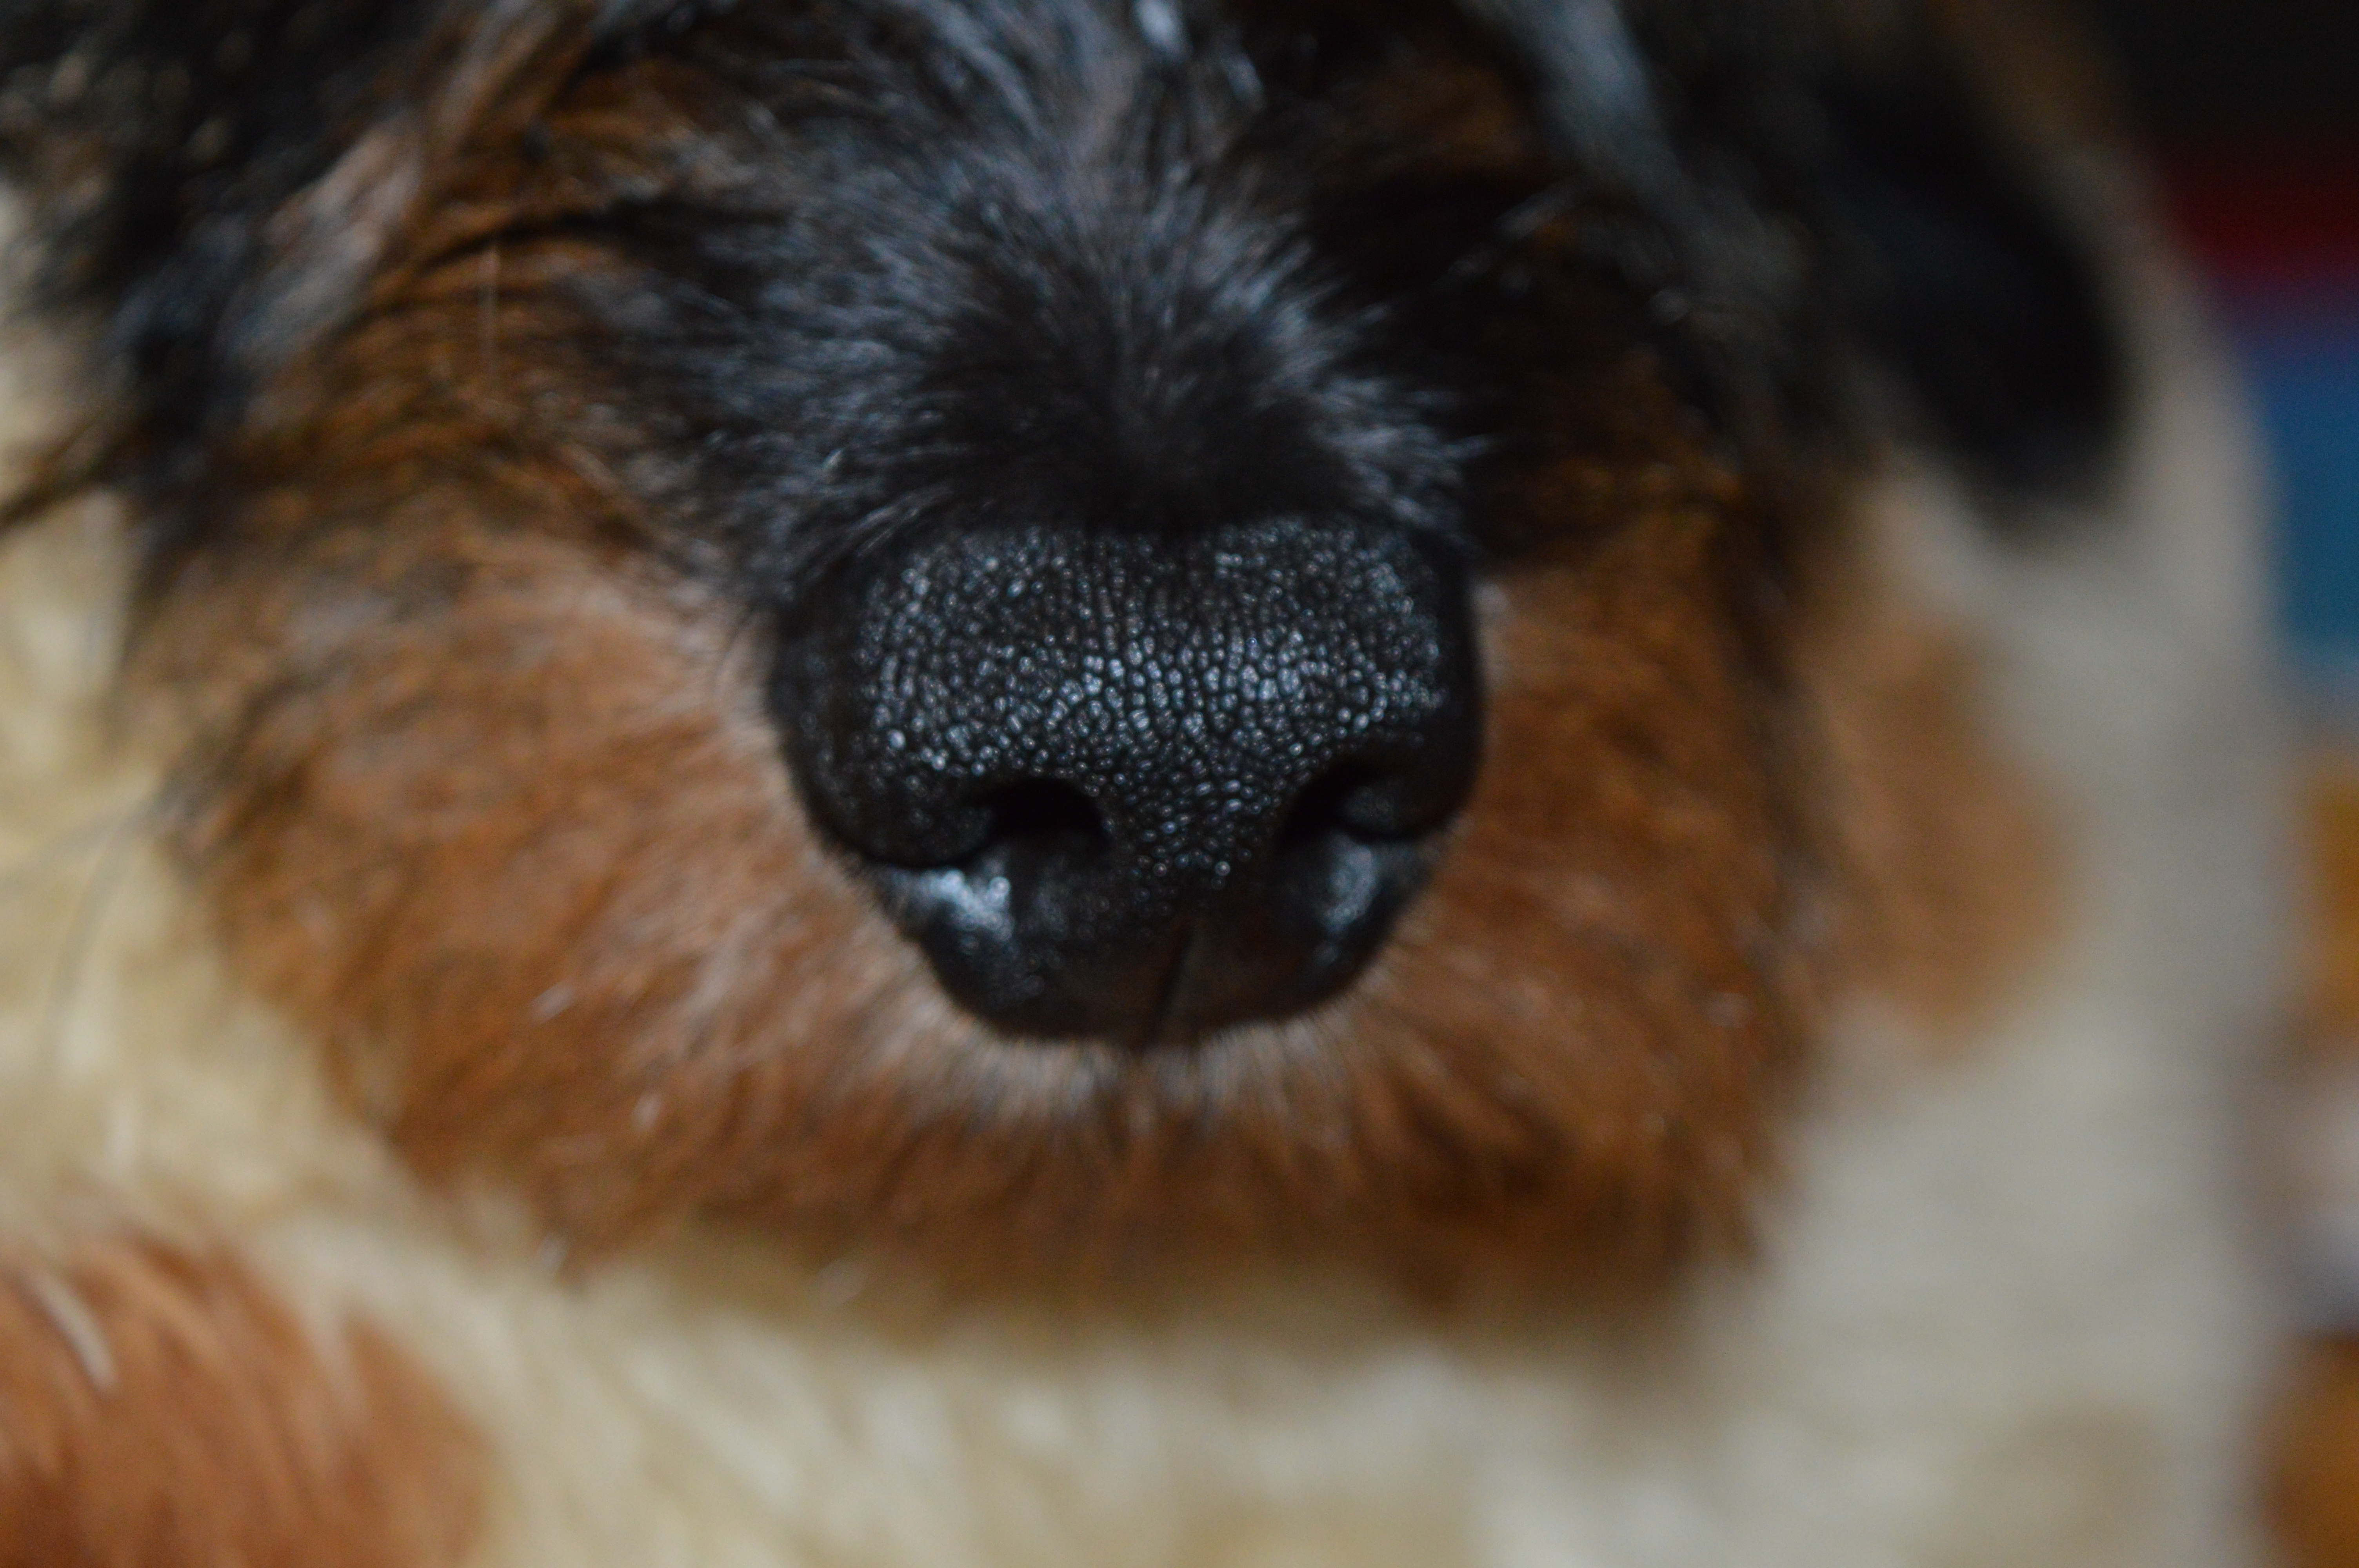 https://browse-tutorials.com/sites/browse-tutorials.com/files/blog-full-images/wirehaired-dachshunds-dog-nose.jpg